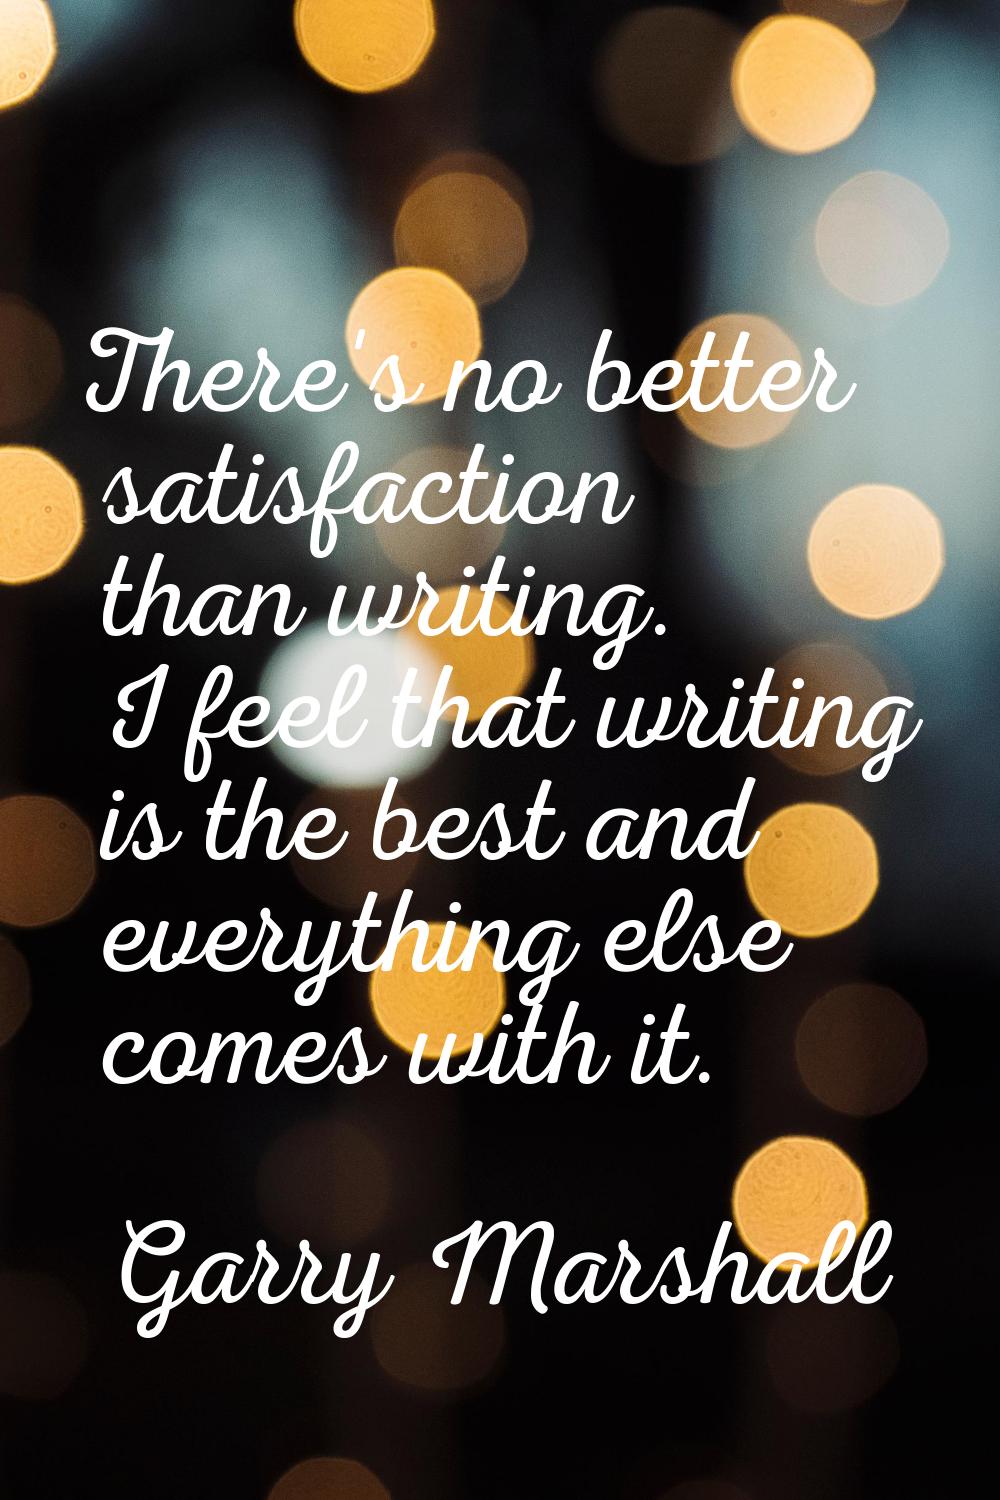 There's no better satisfaction than writing. I feel that writing is the best and everything else co